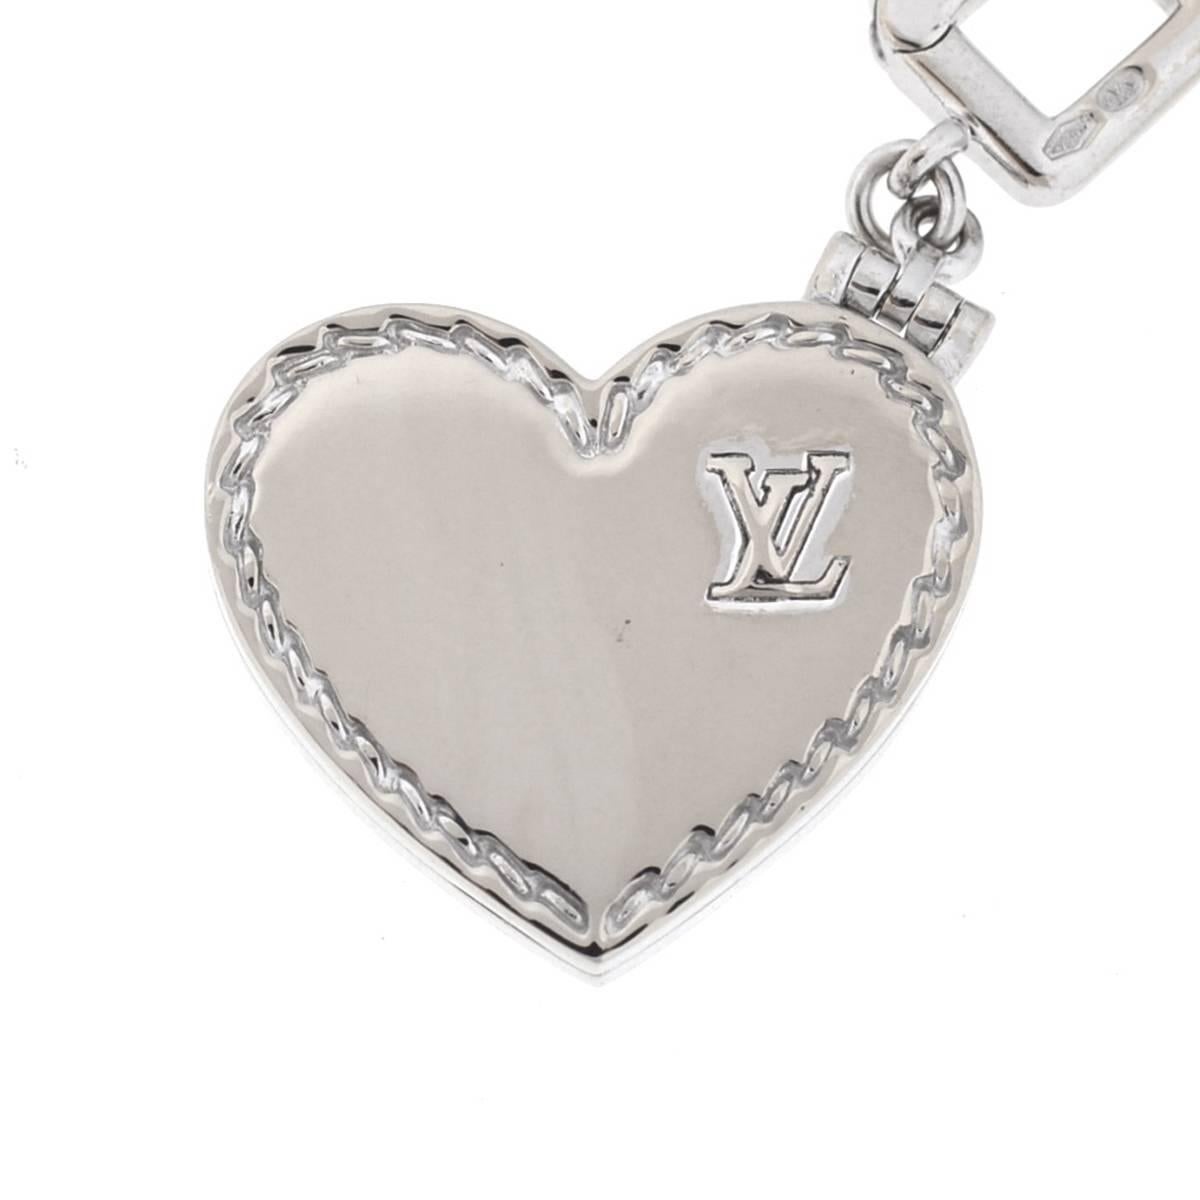 Company - Louis Vuitton
Style - Heart Locket Charm Pendant 
Metal - 18k White Gold
Weight / Size - 15.8 grams / 23mm
Includes - Charm Only
7576-1ume